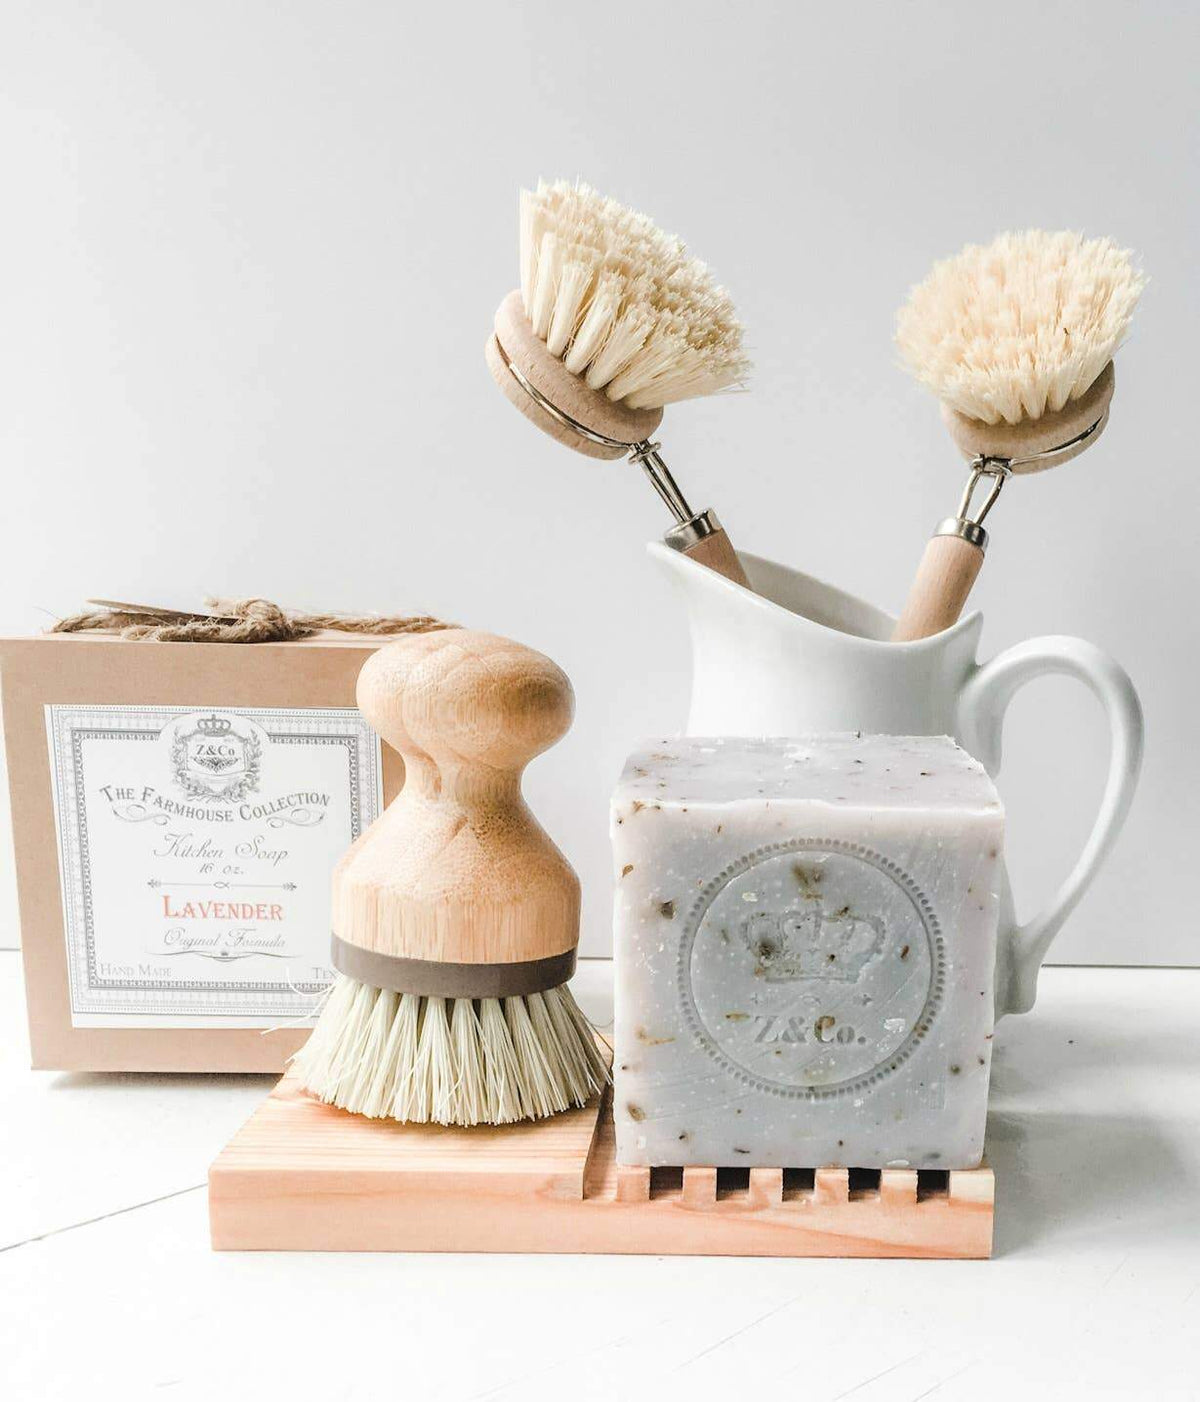 A neat display of eco-friendly cleaning supplies including two wooden scrub brushes, a bar of Z&Co. Lavender Farmhouse Solid-Block Dish Soap, and a soap dish, arranged next to a white ceramic pitcher on a light background.